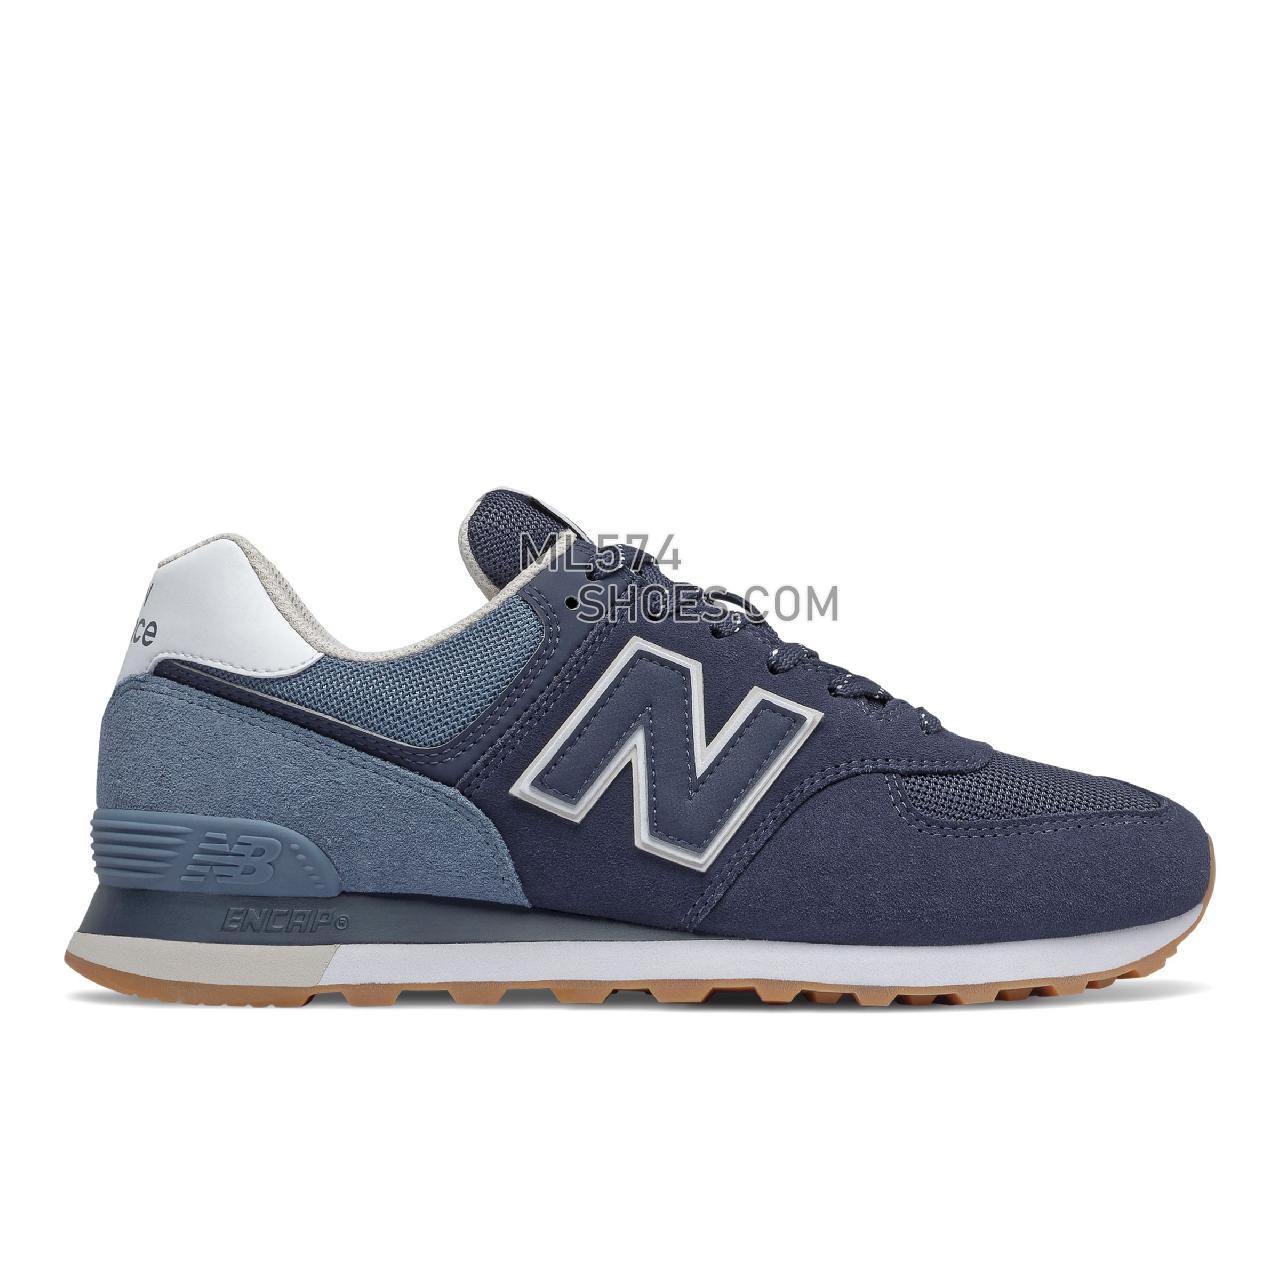 New Balance 574v2 - Men's Classic Sneakers - Nb Navy with Deep Porcelain Blue - ML574GRE